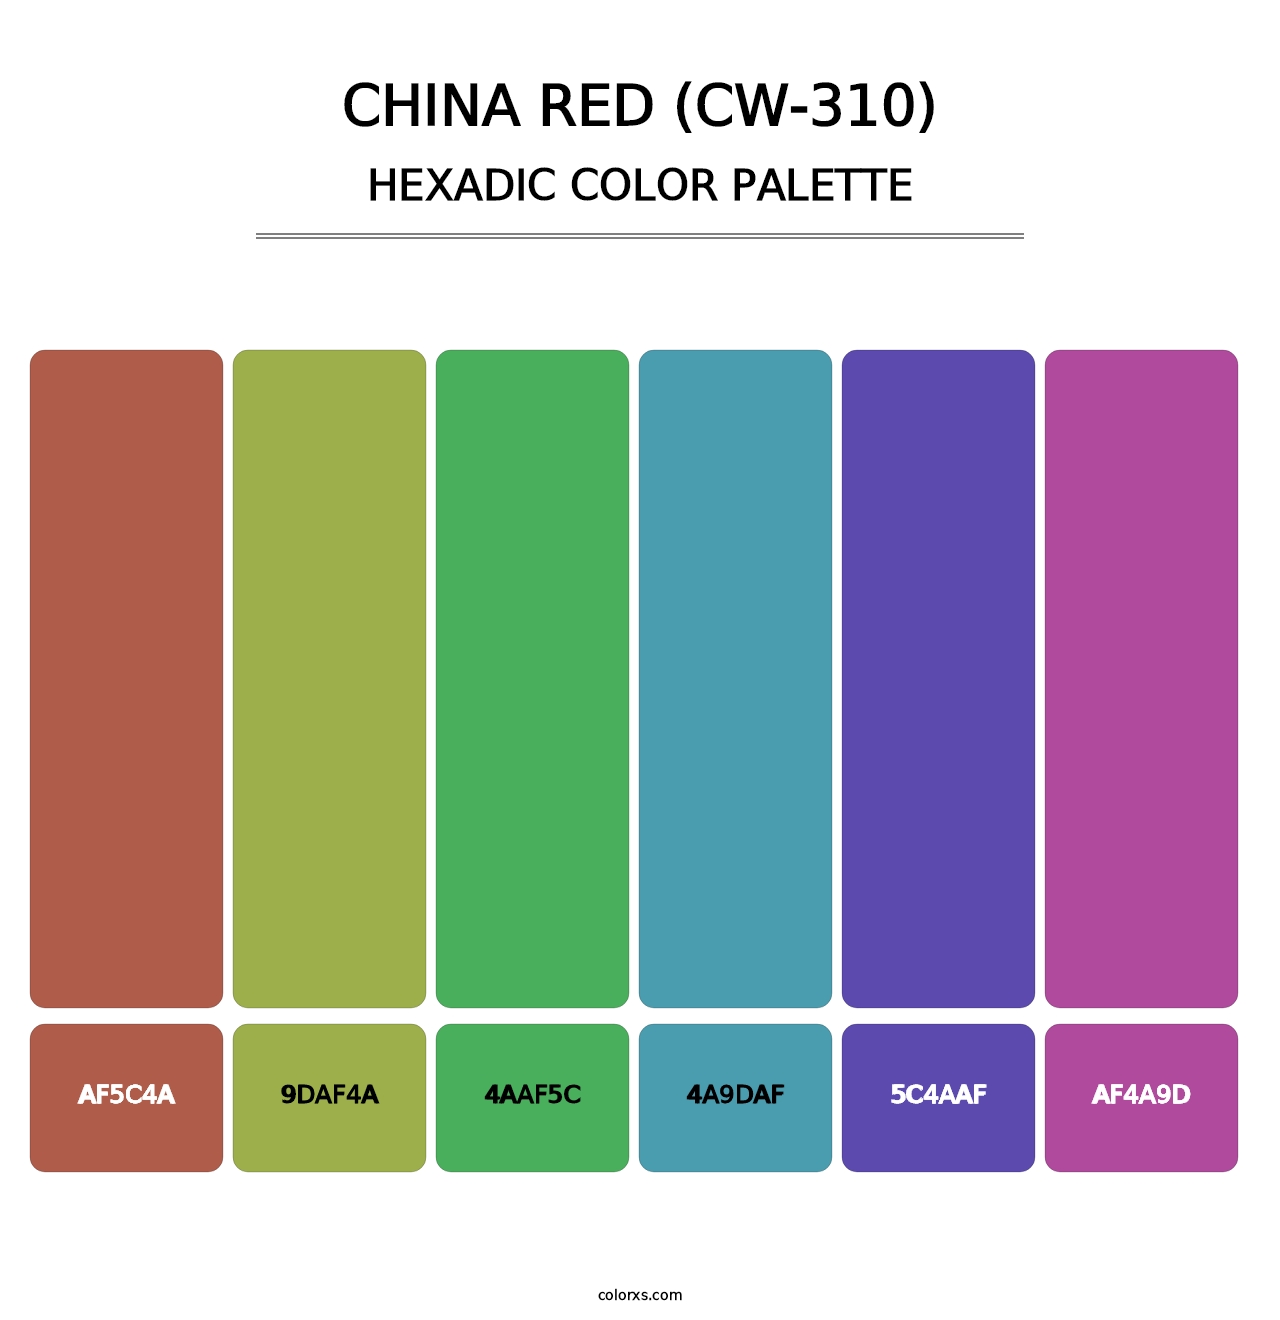 China Red (CW-310) - Hexadic Color Palette